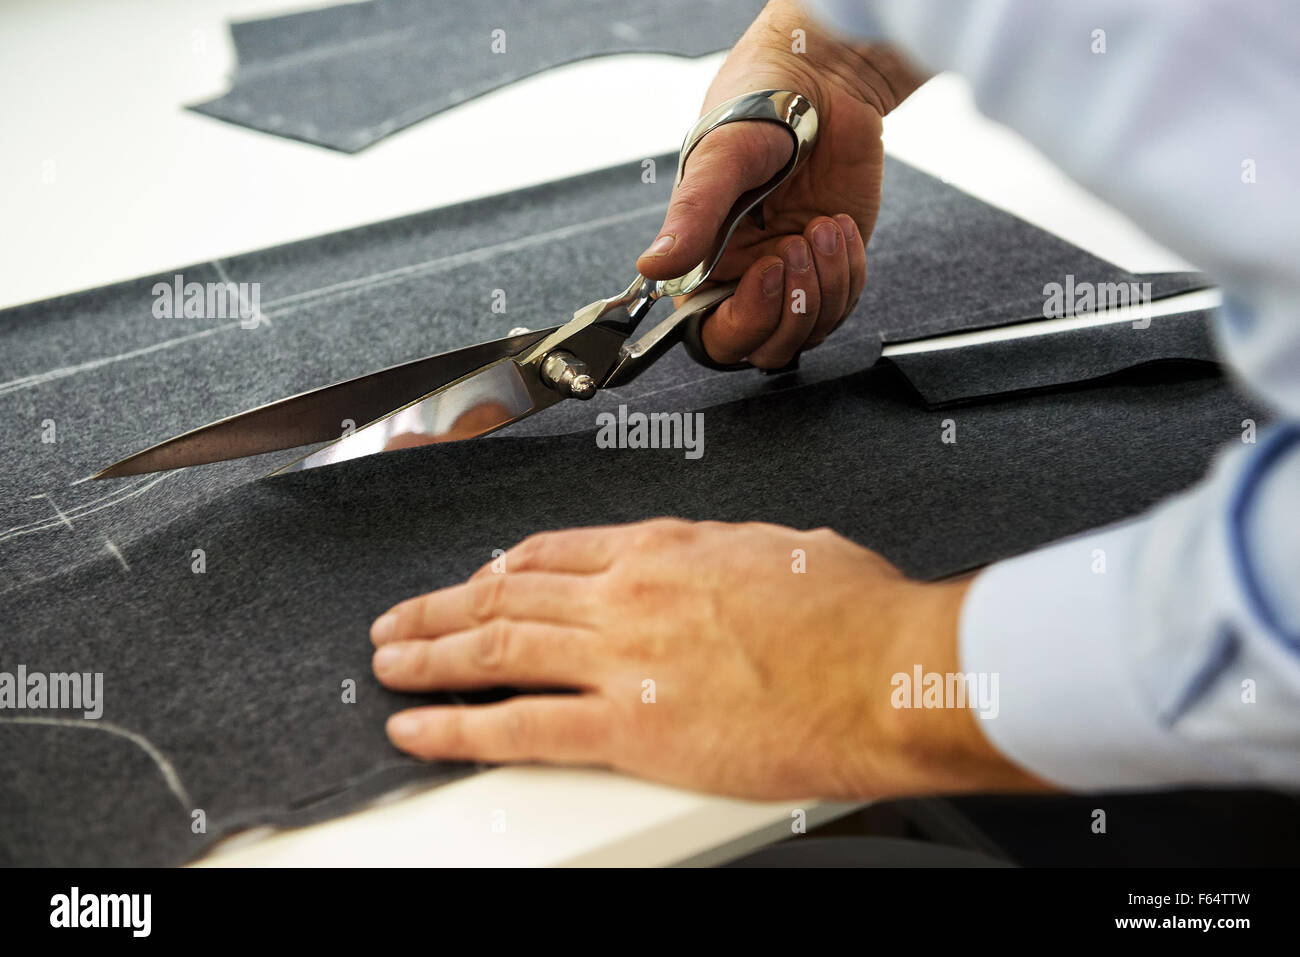 Tailor cutting out the marked pattern on dark fabric with large scissors on the workbench in his shop, close up view of his hand Stock Photo